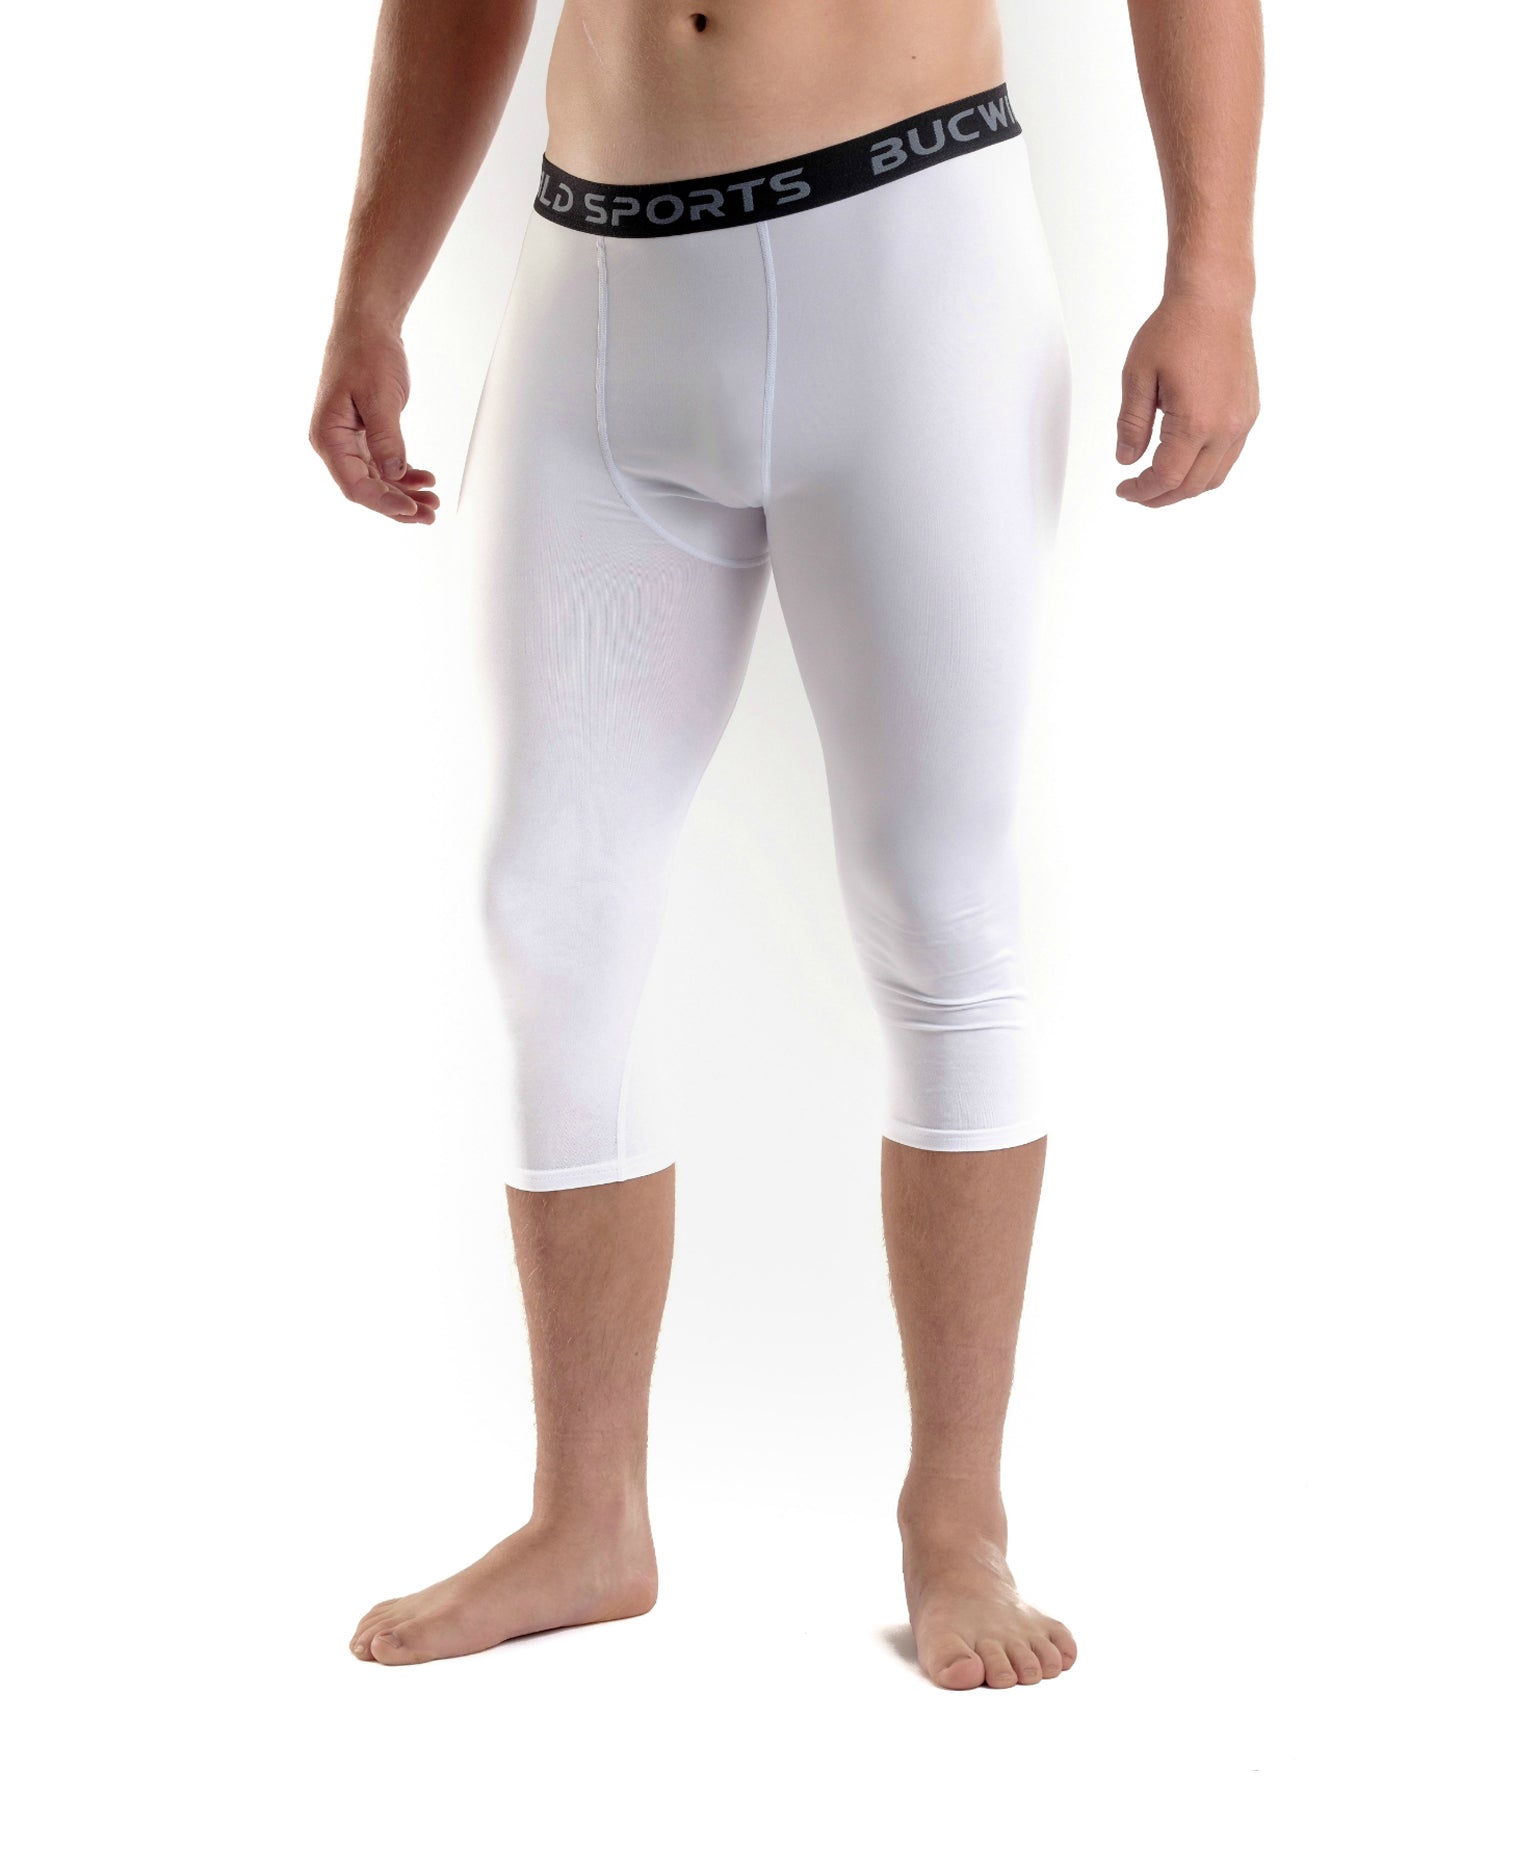 3/4 Compression Pants/Tights - White